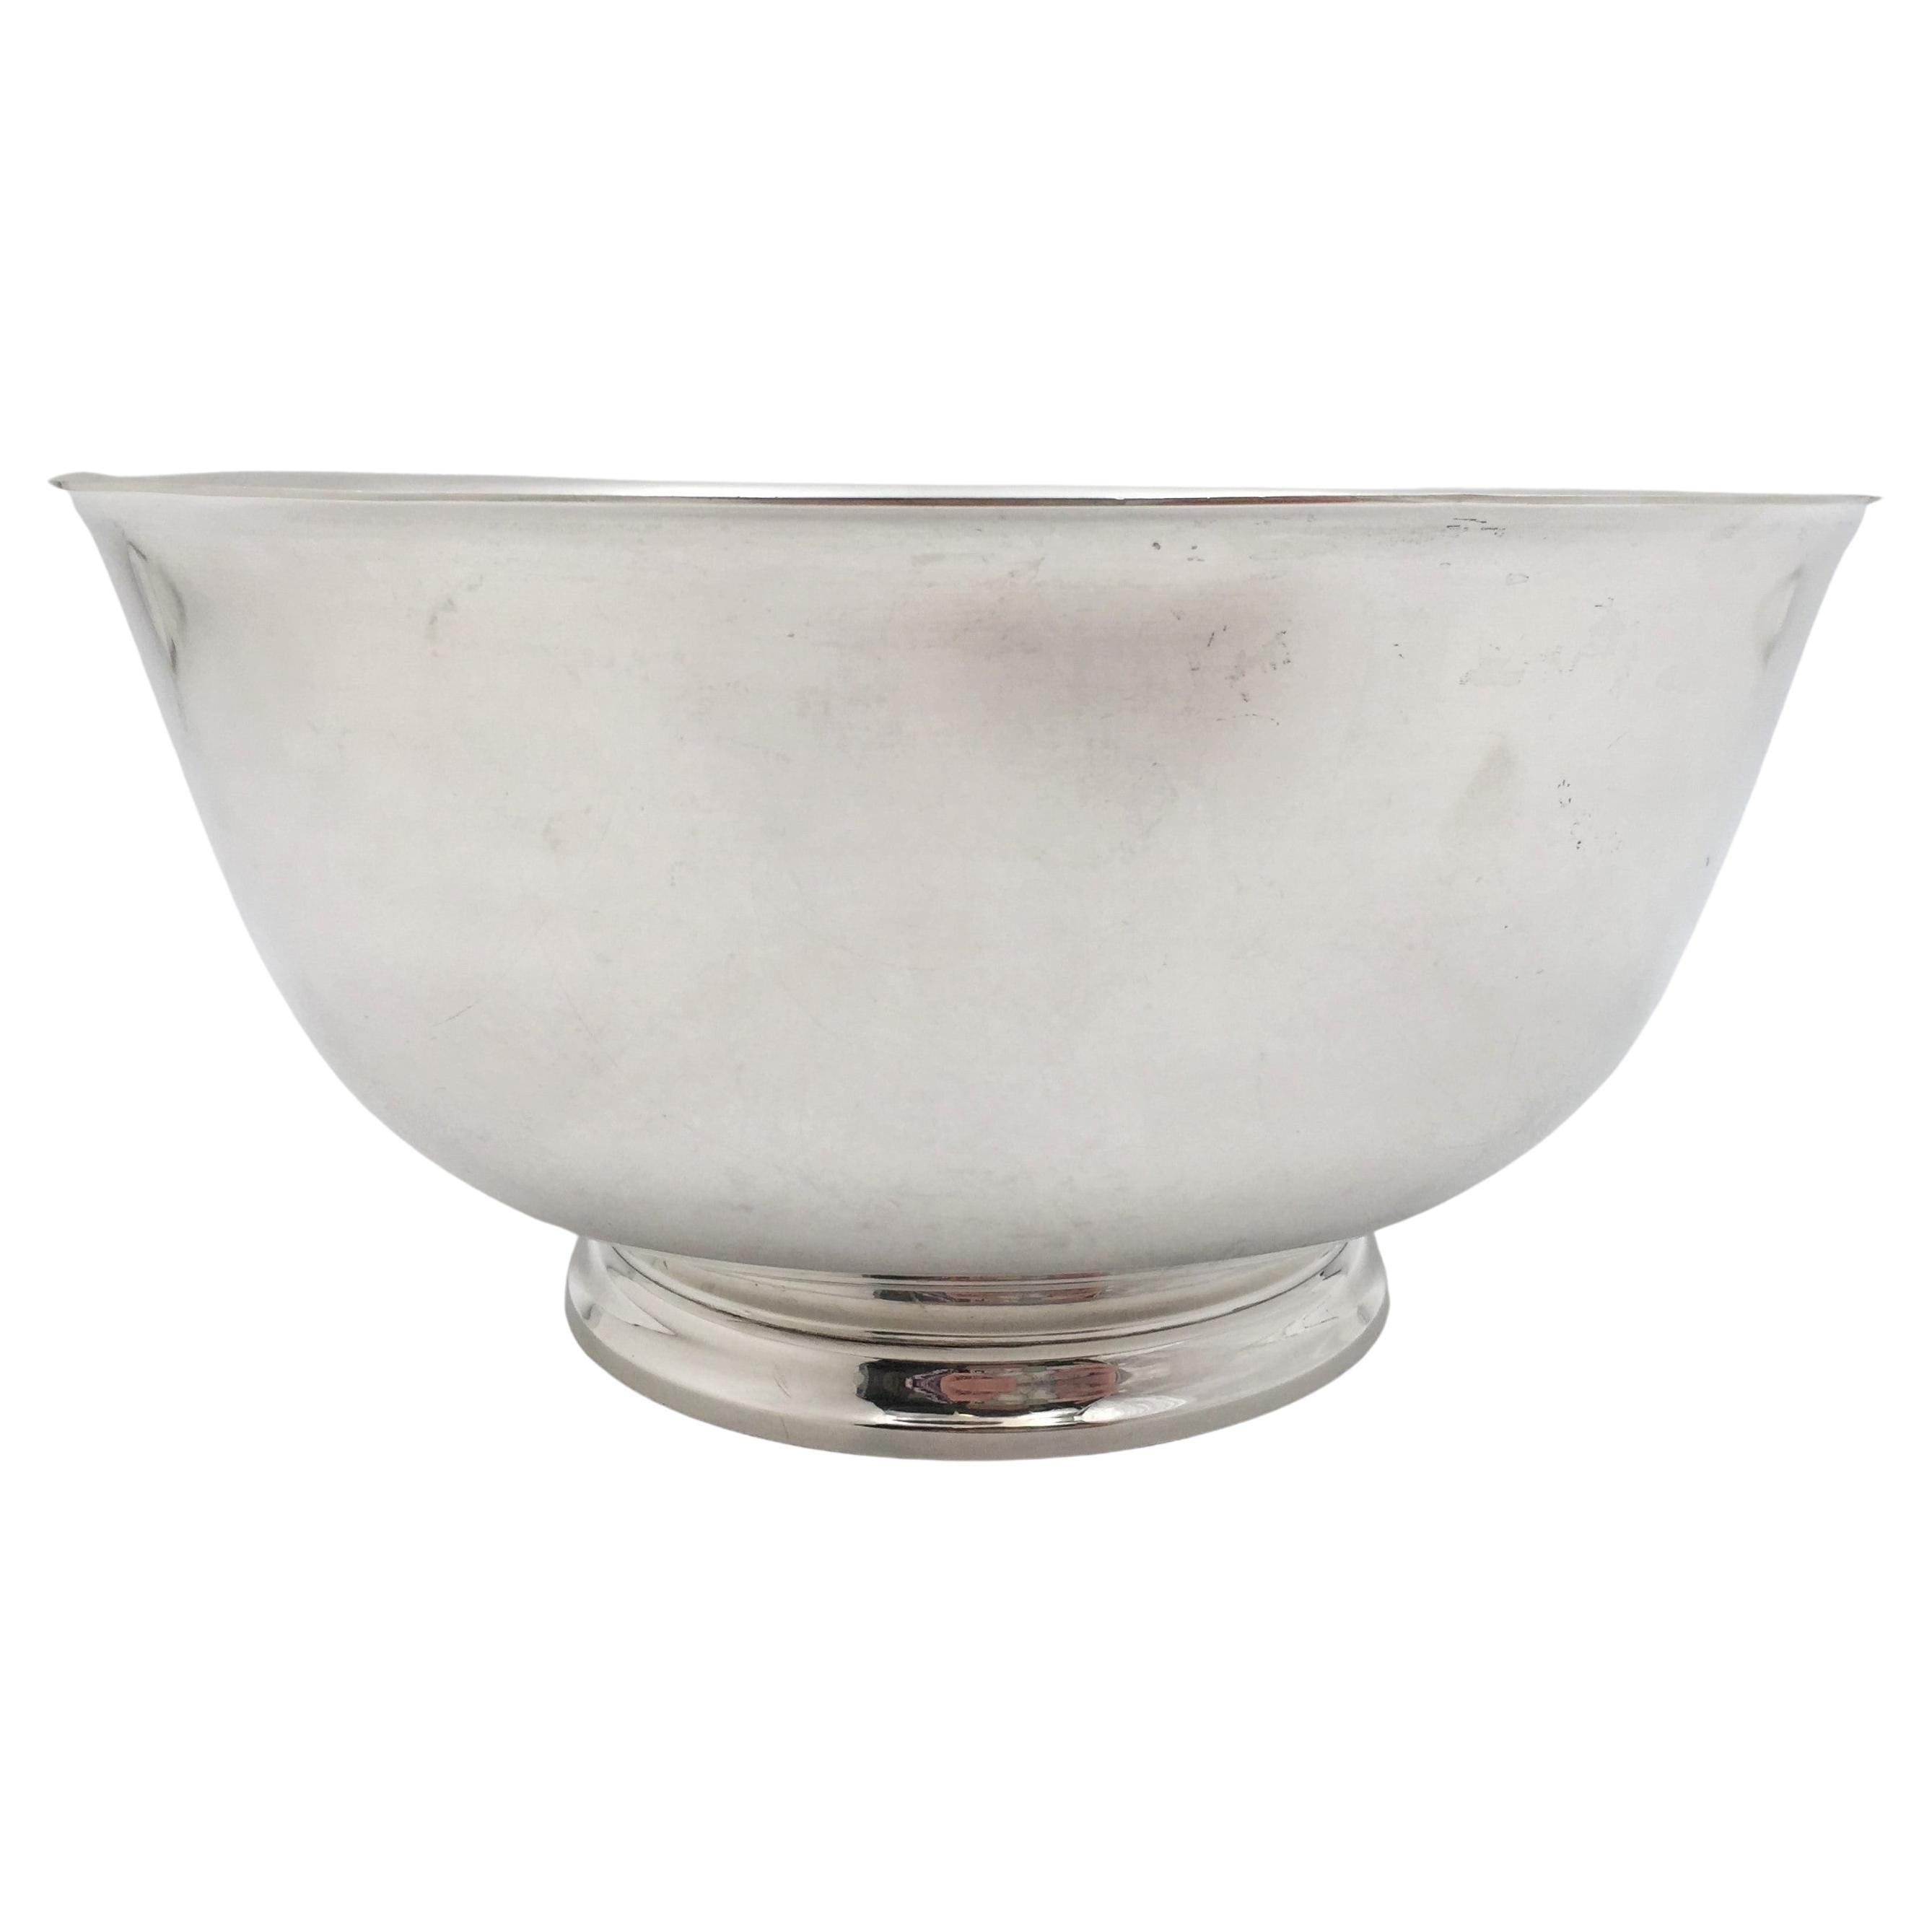 Tiffany & Co. Sterling Silver 1950 Bowl in Mid-Century Modern Style